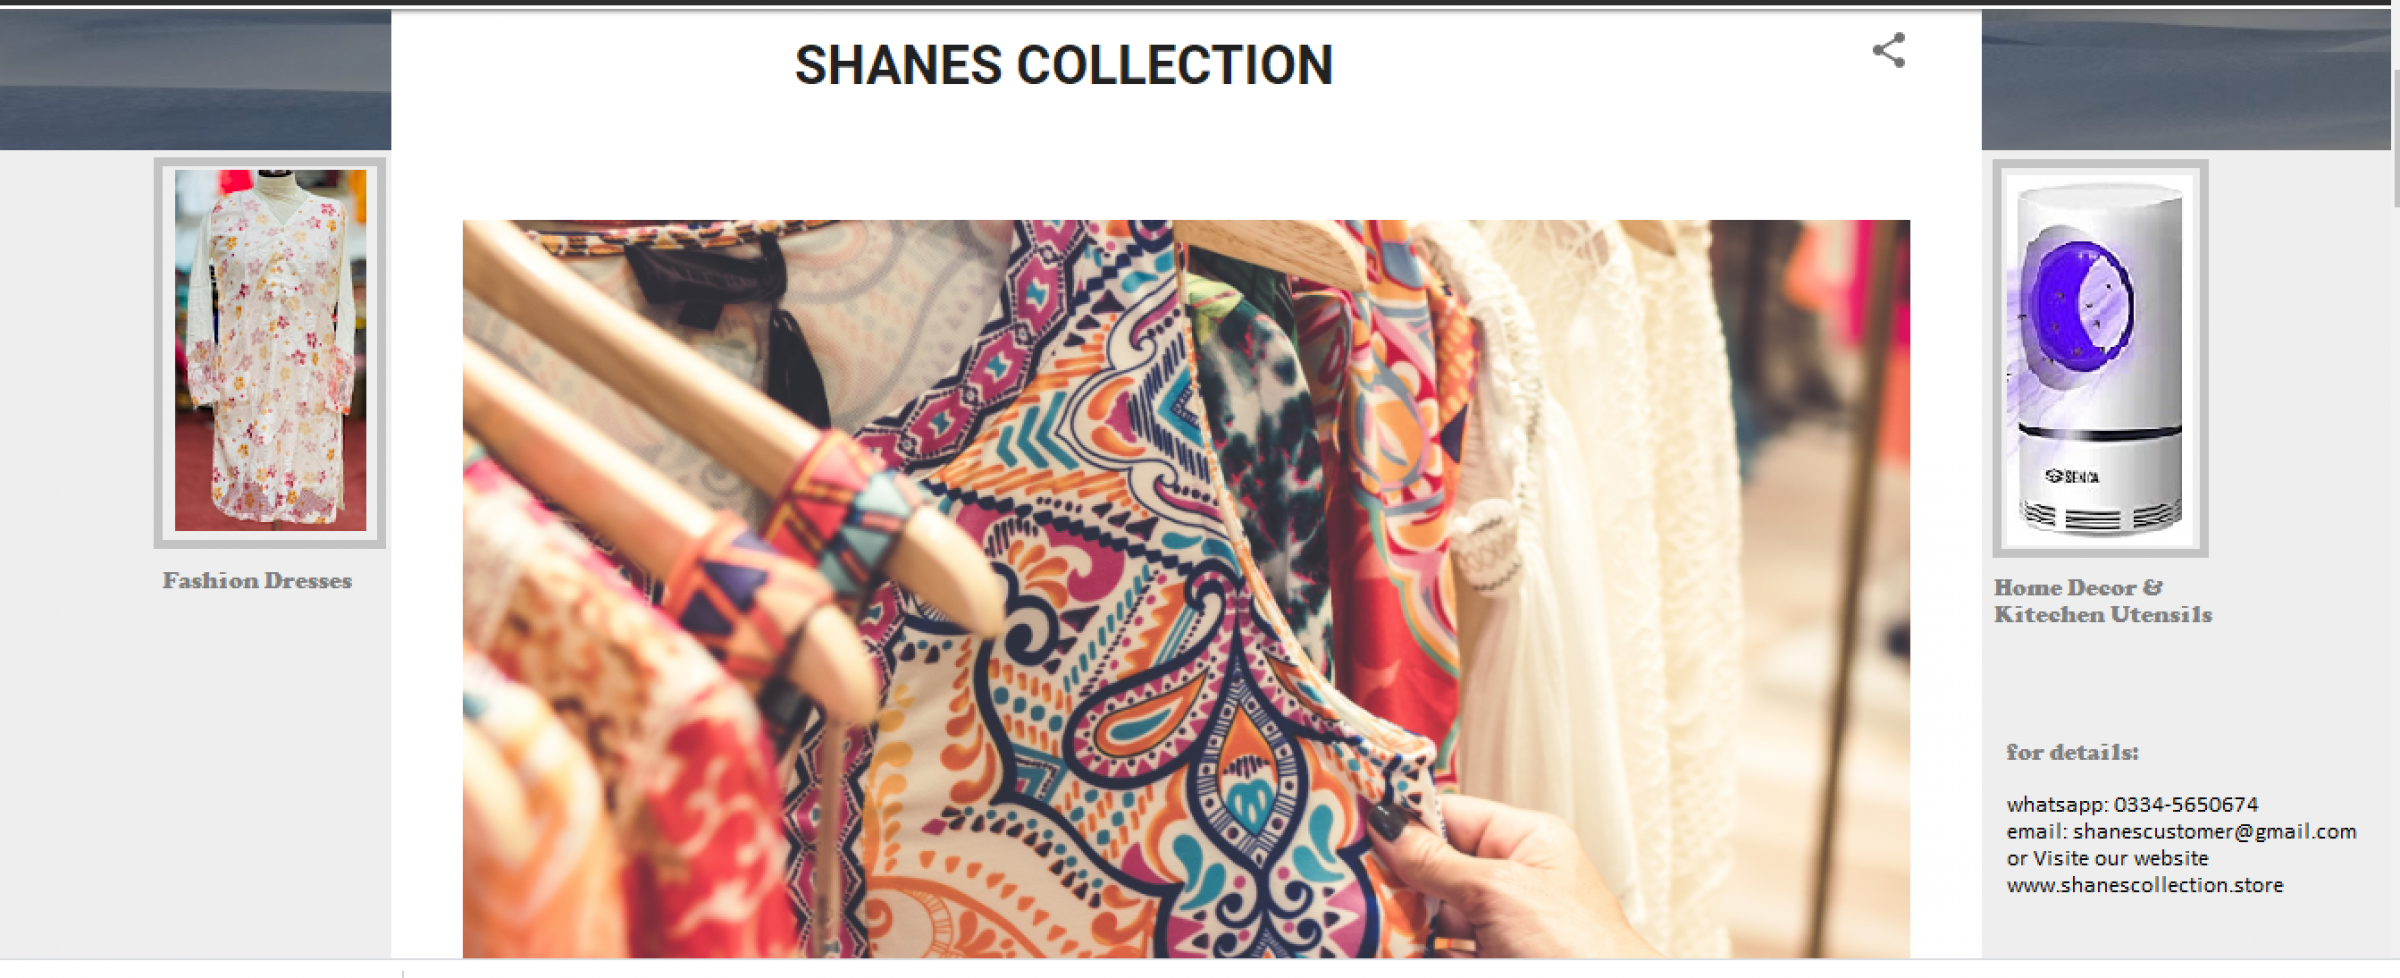 Shanes Collection